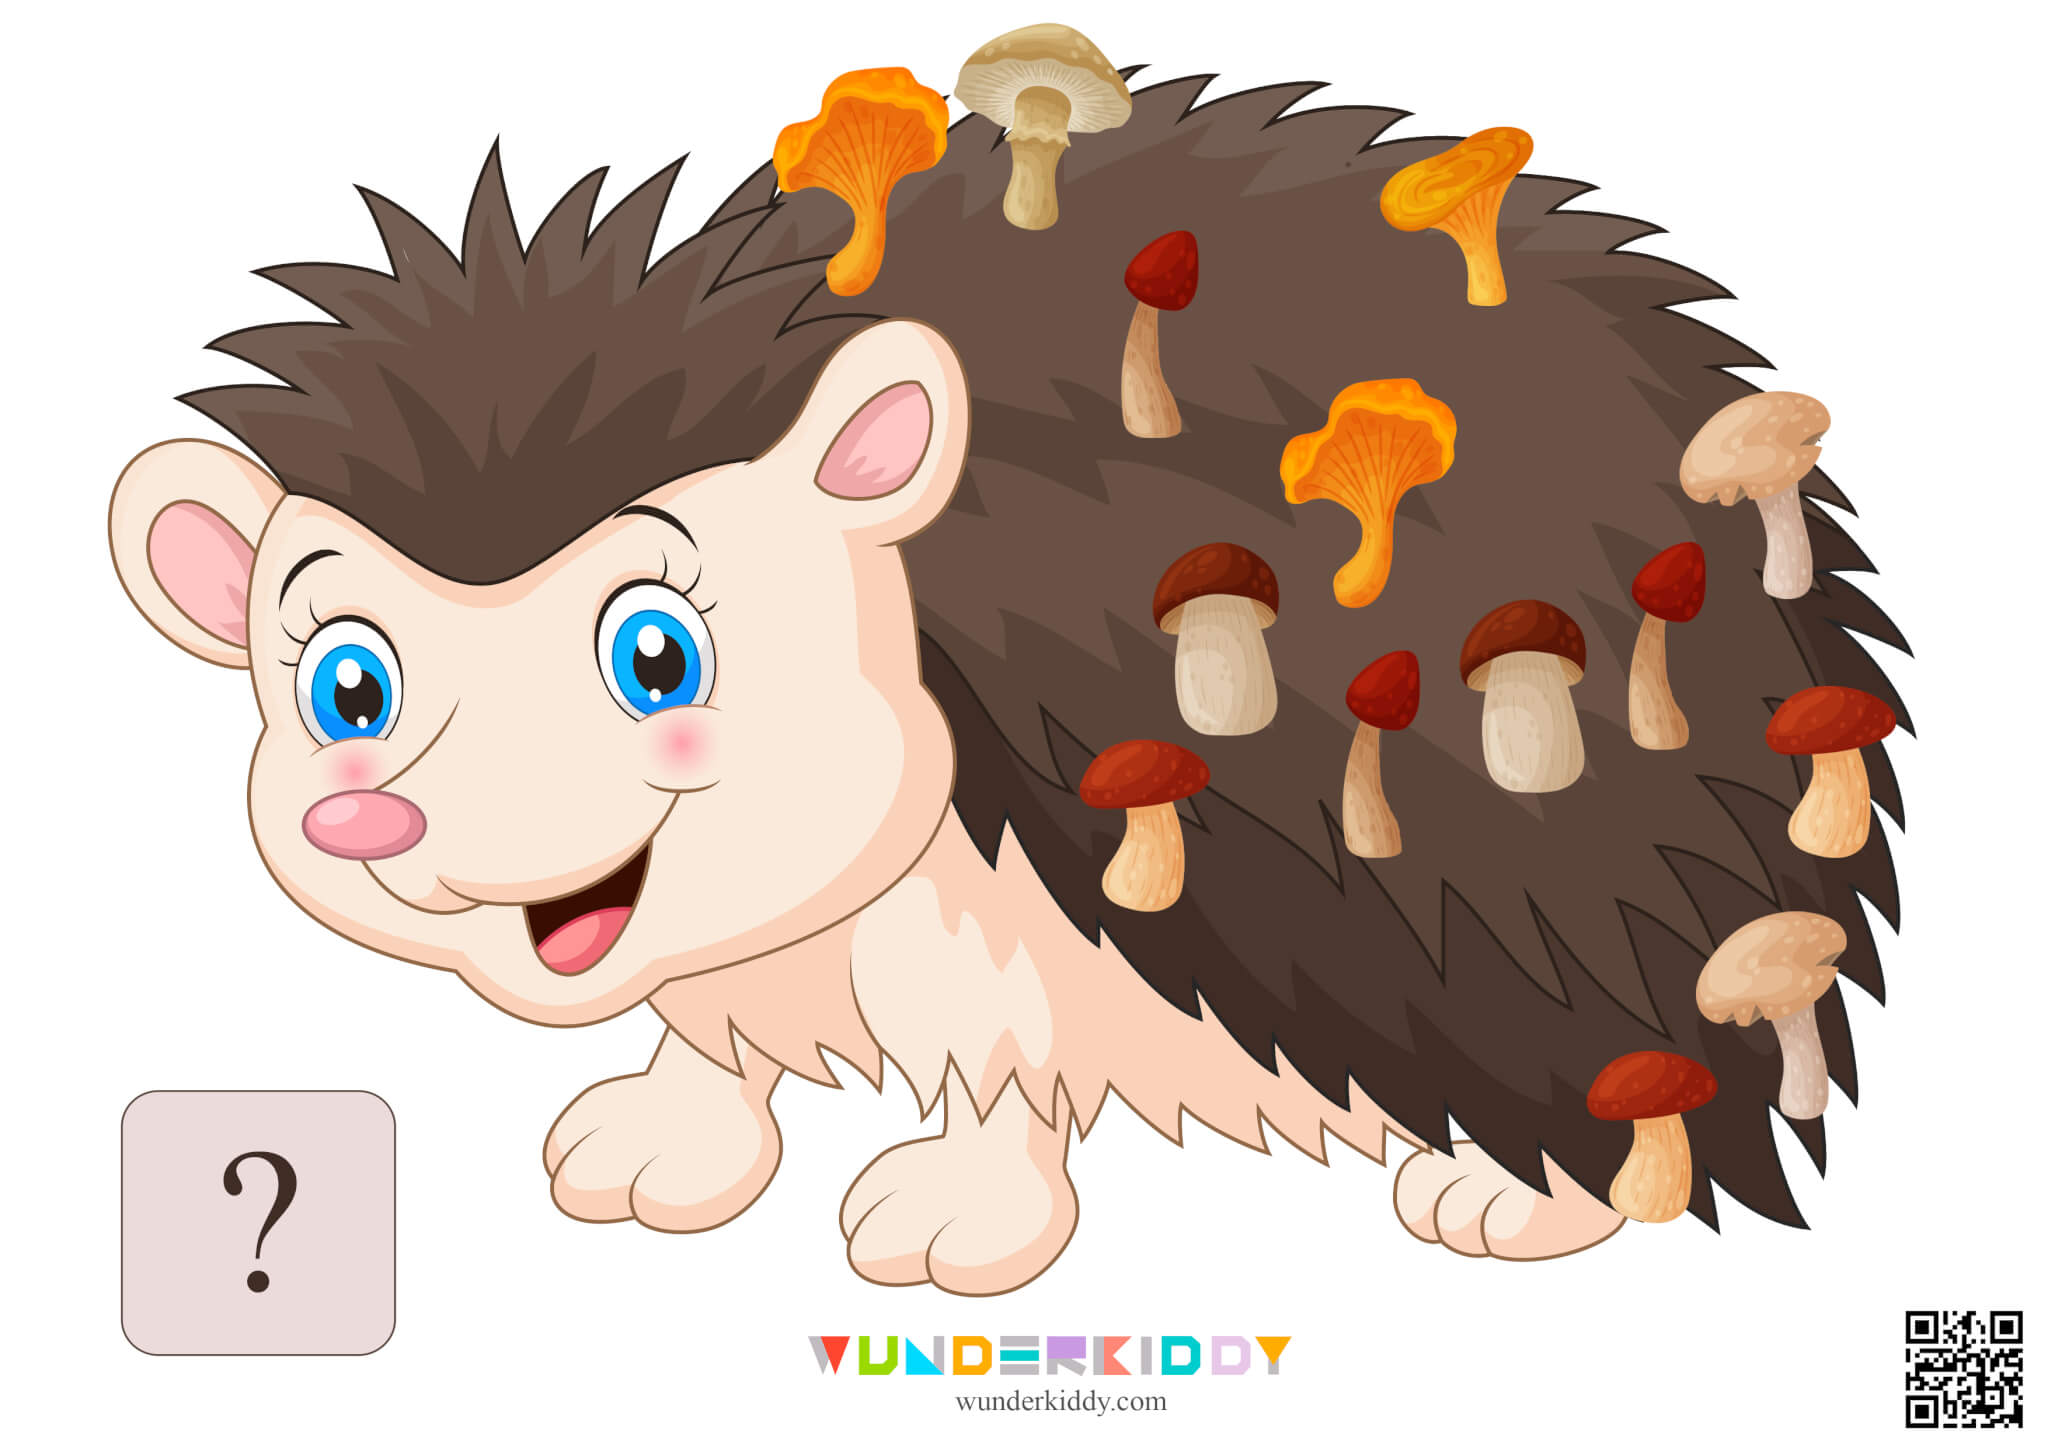 Worksheet Count to 20 with Hedgehog and Mushrooms - Image 18